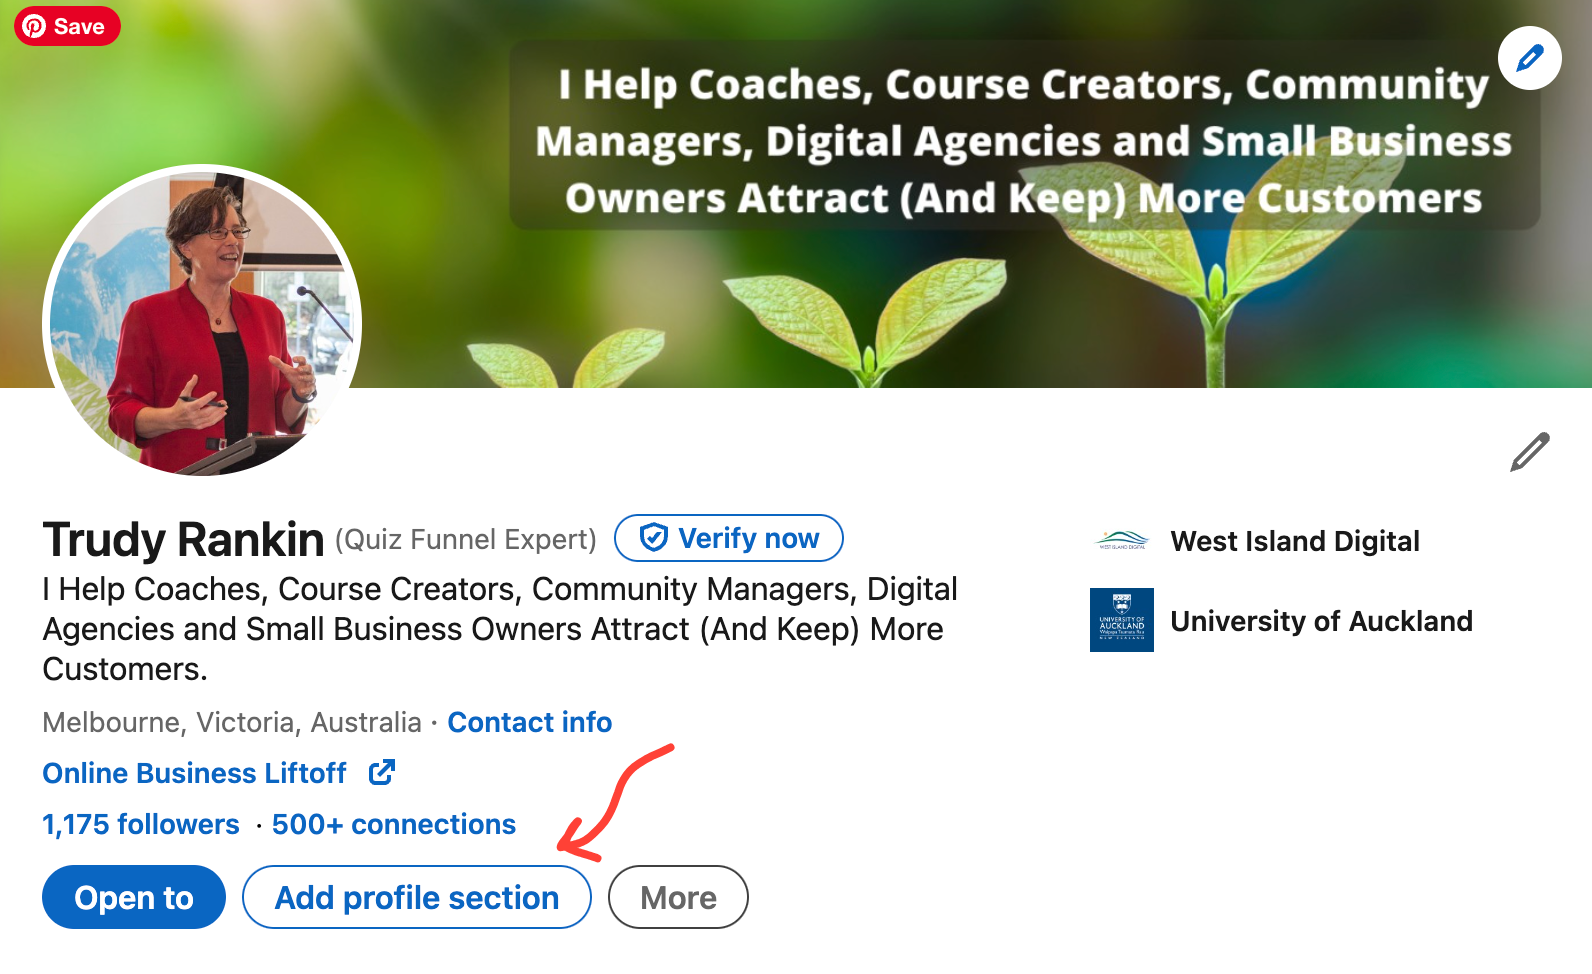 Image shows how to add a new profile section (in this case to add the Services section)